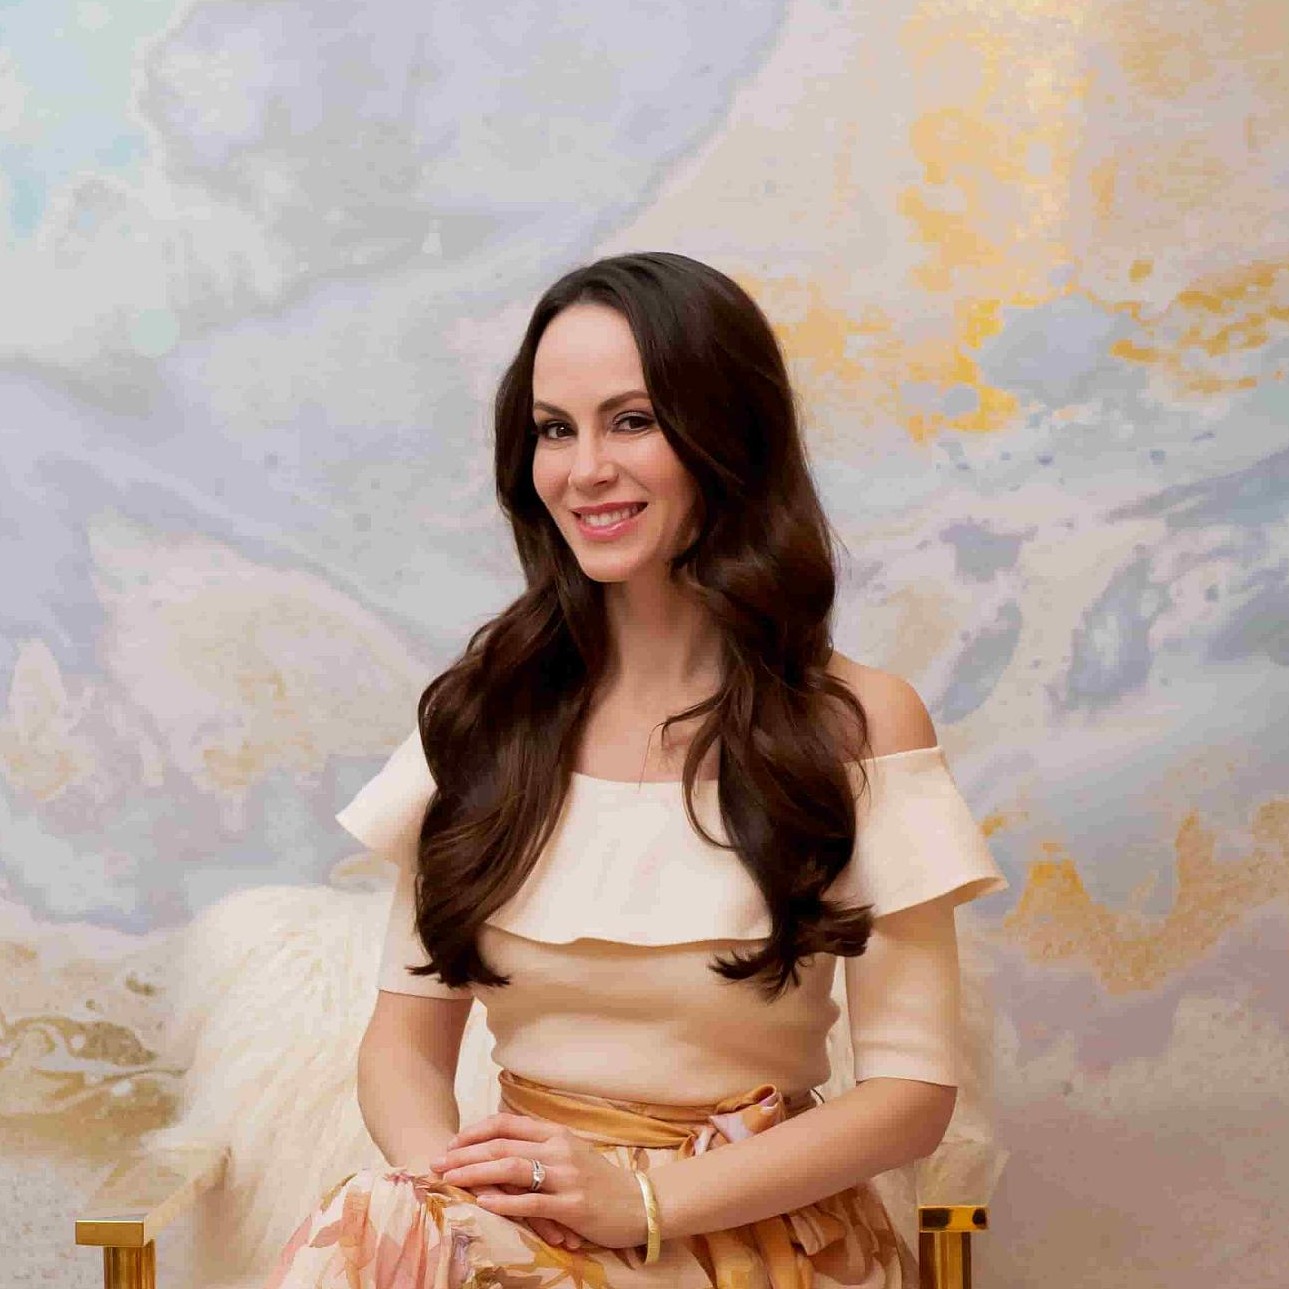 A woman with long brown hair, Lisa Chevalier, sits in front of a watercolor background and smiles.